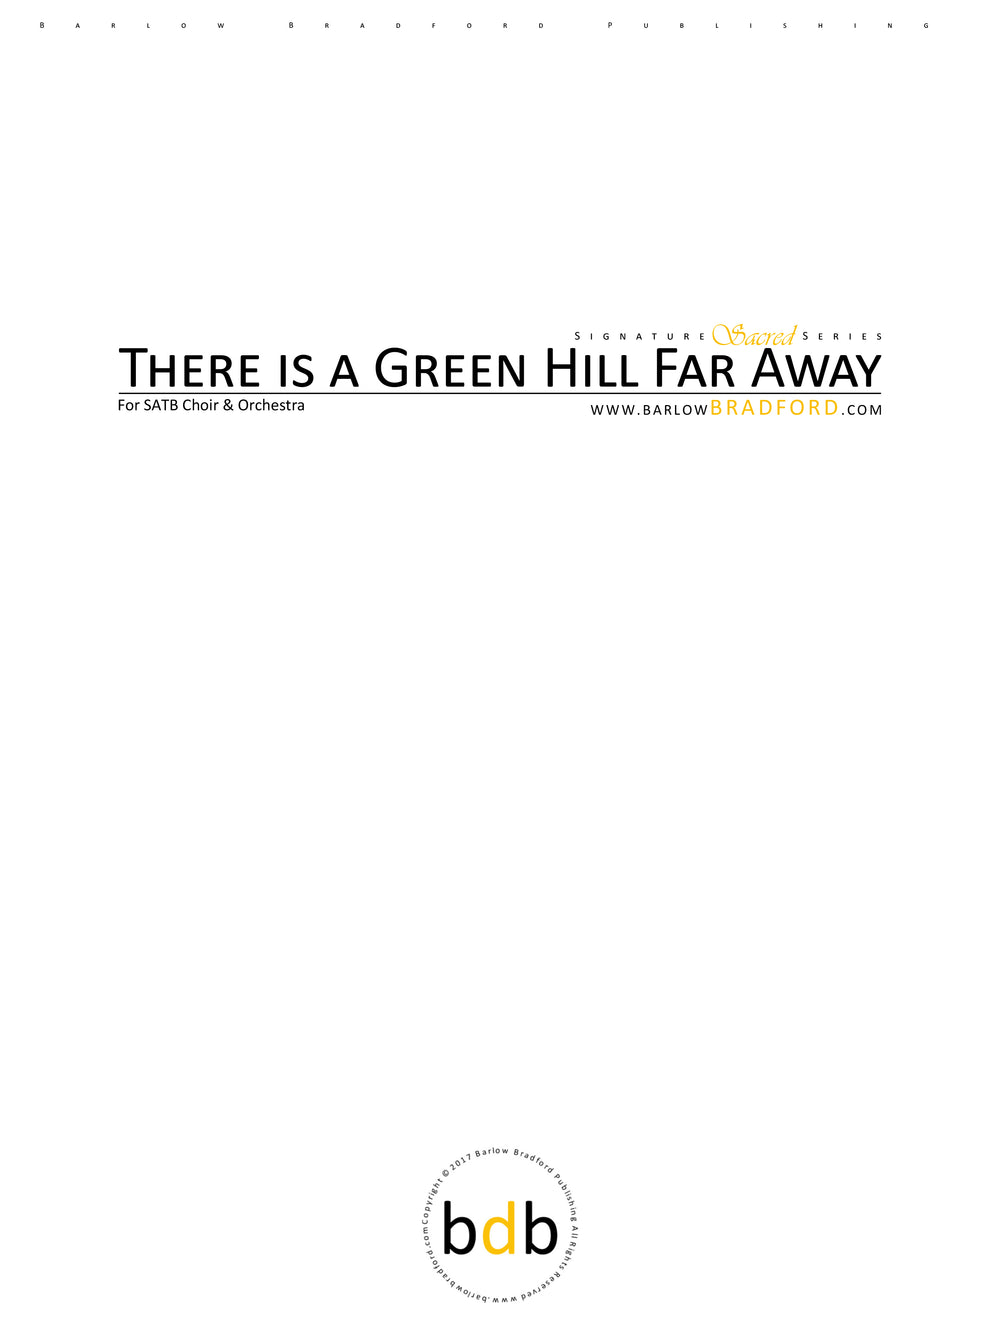 There is a Green Hill Far Away